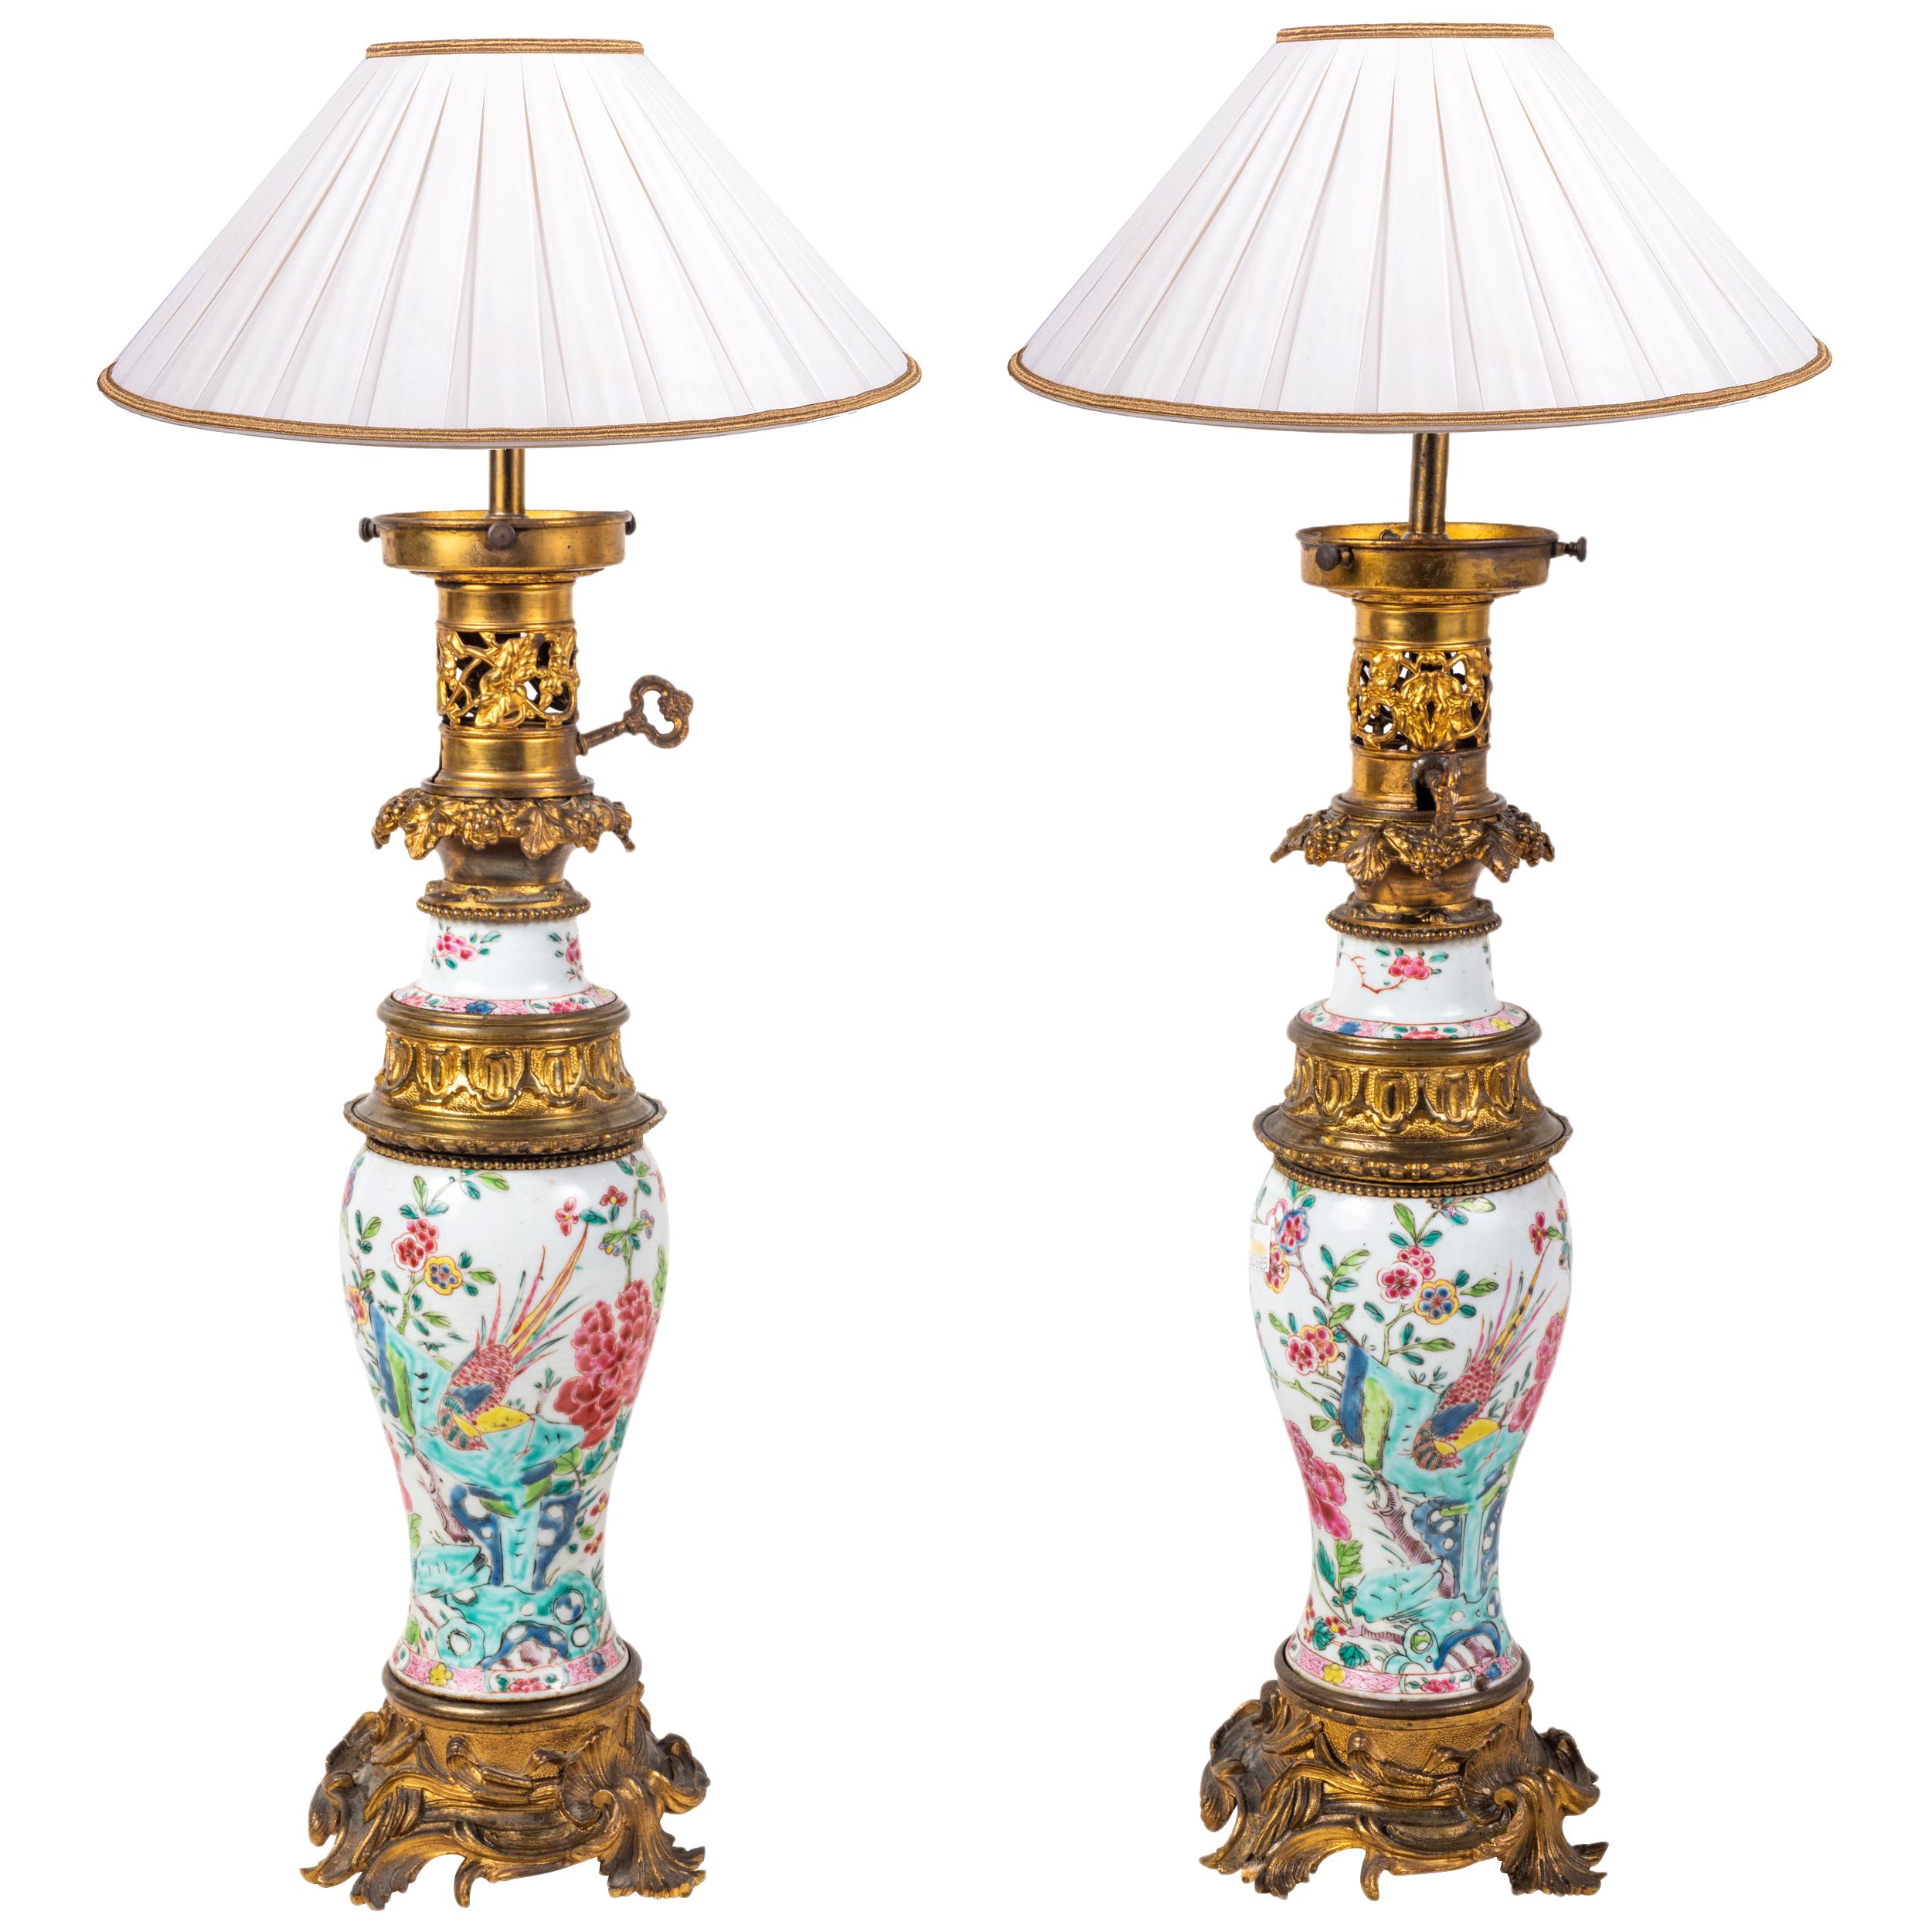 Pair of 19th Century Chinese Famille Rose Vases / Lamps, circa 1880